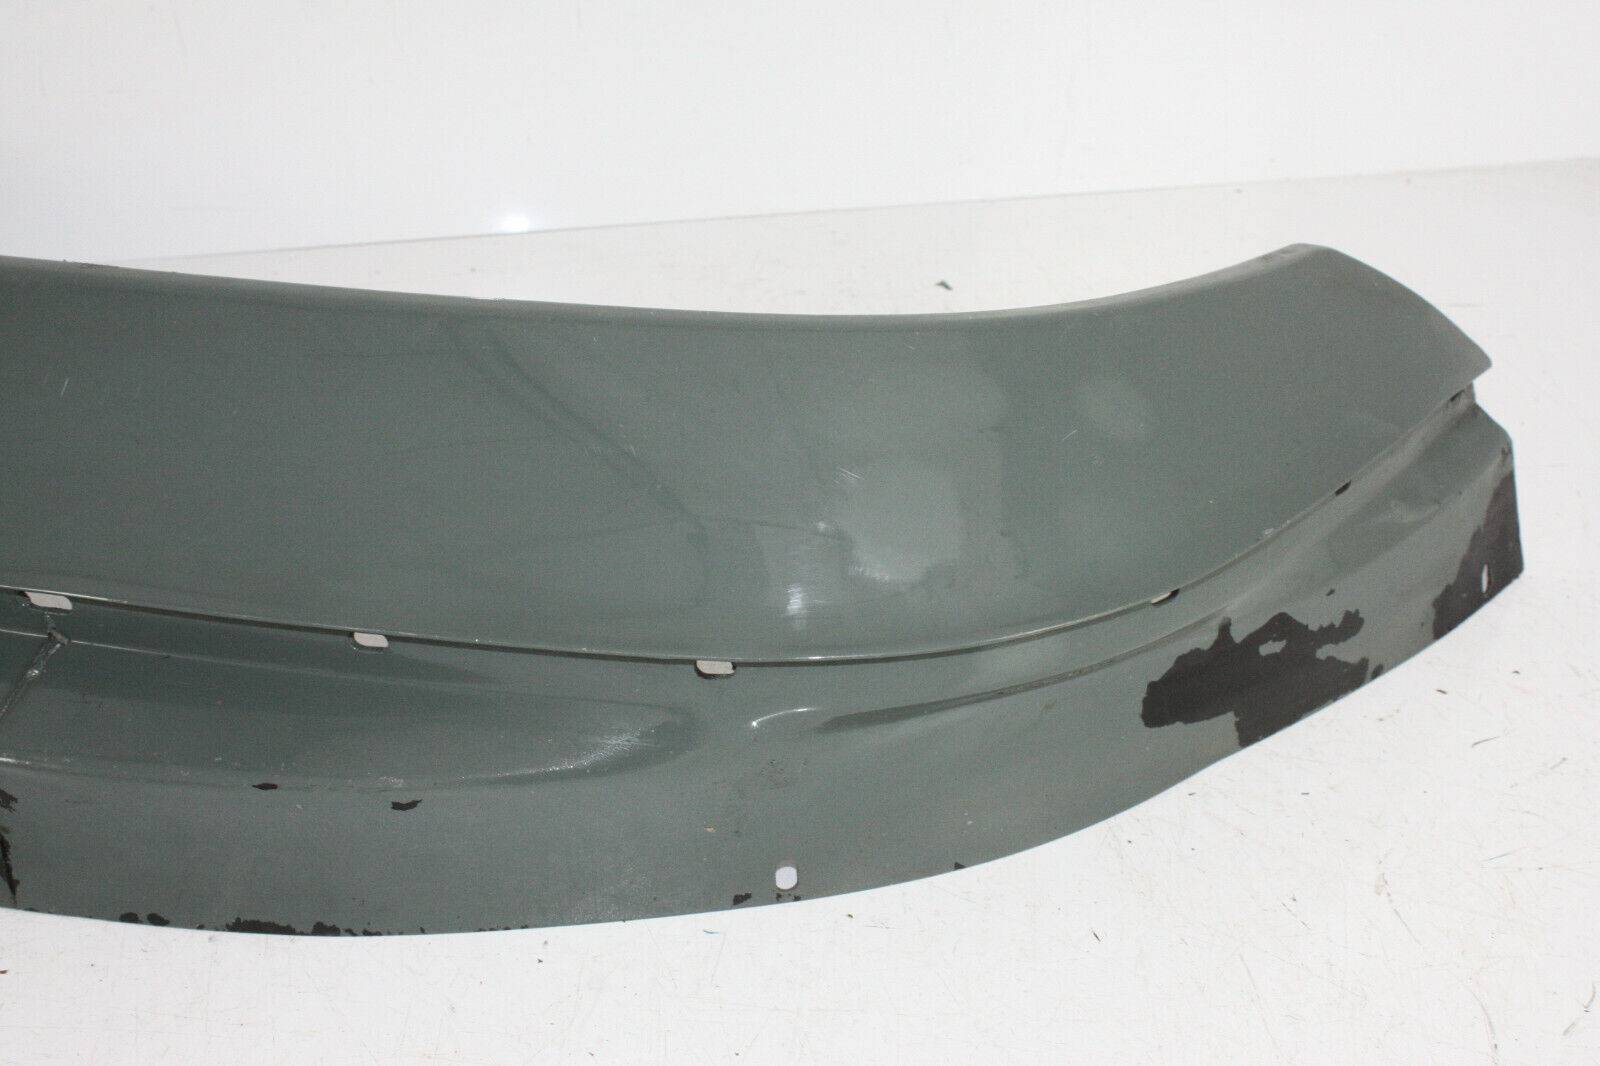 Land-Rover-Defender-Wheel-Arch-Flare-Spat-Front-Left-Painted-Type-Genuine-175367529954-6